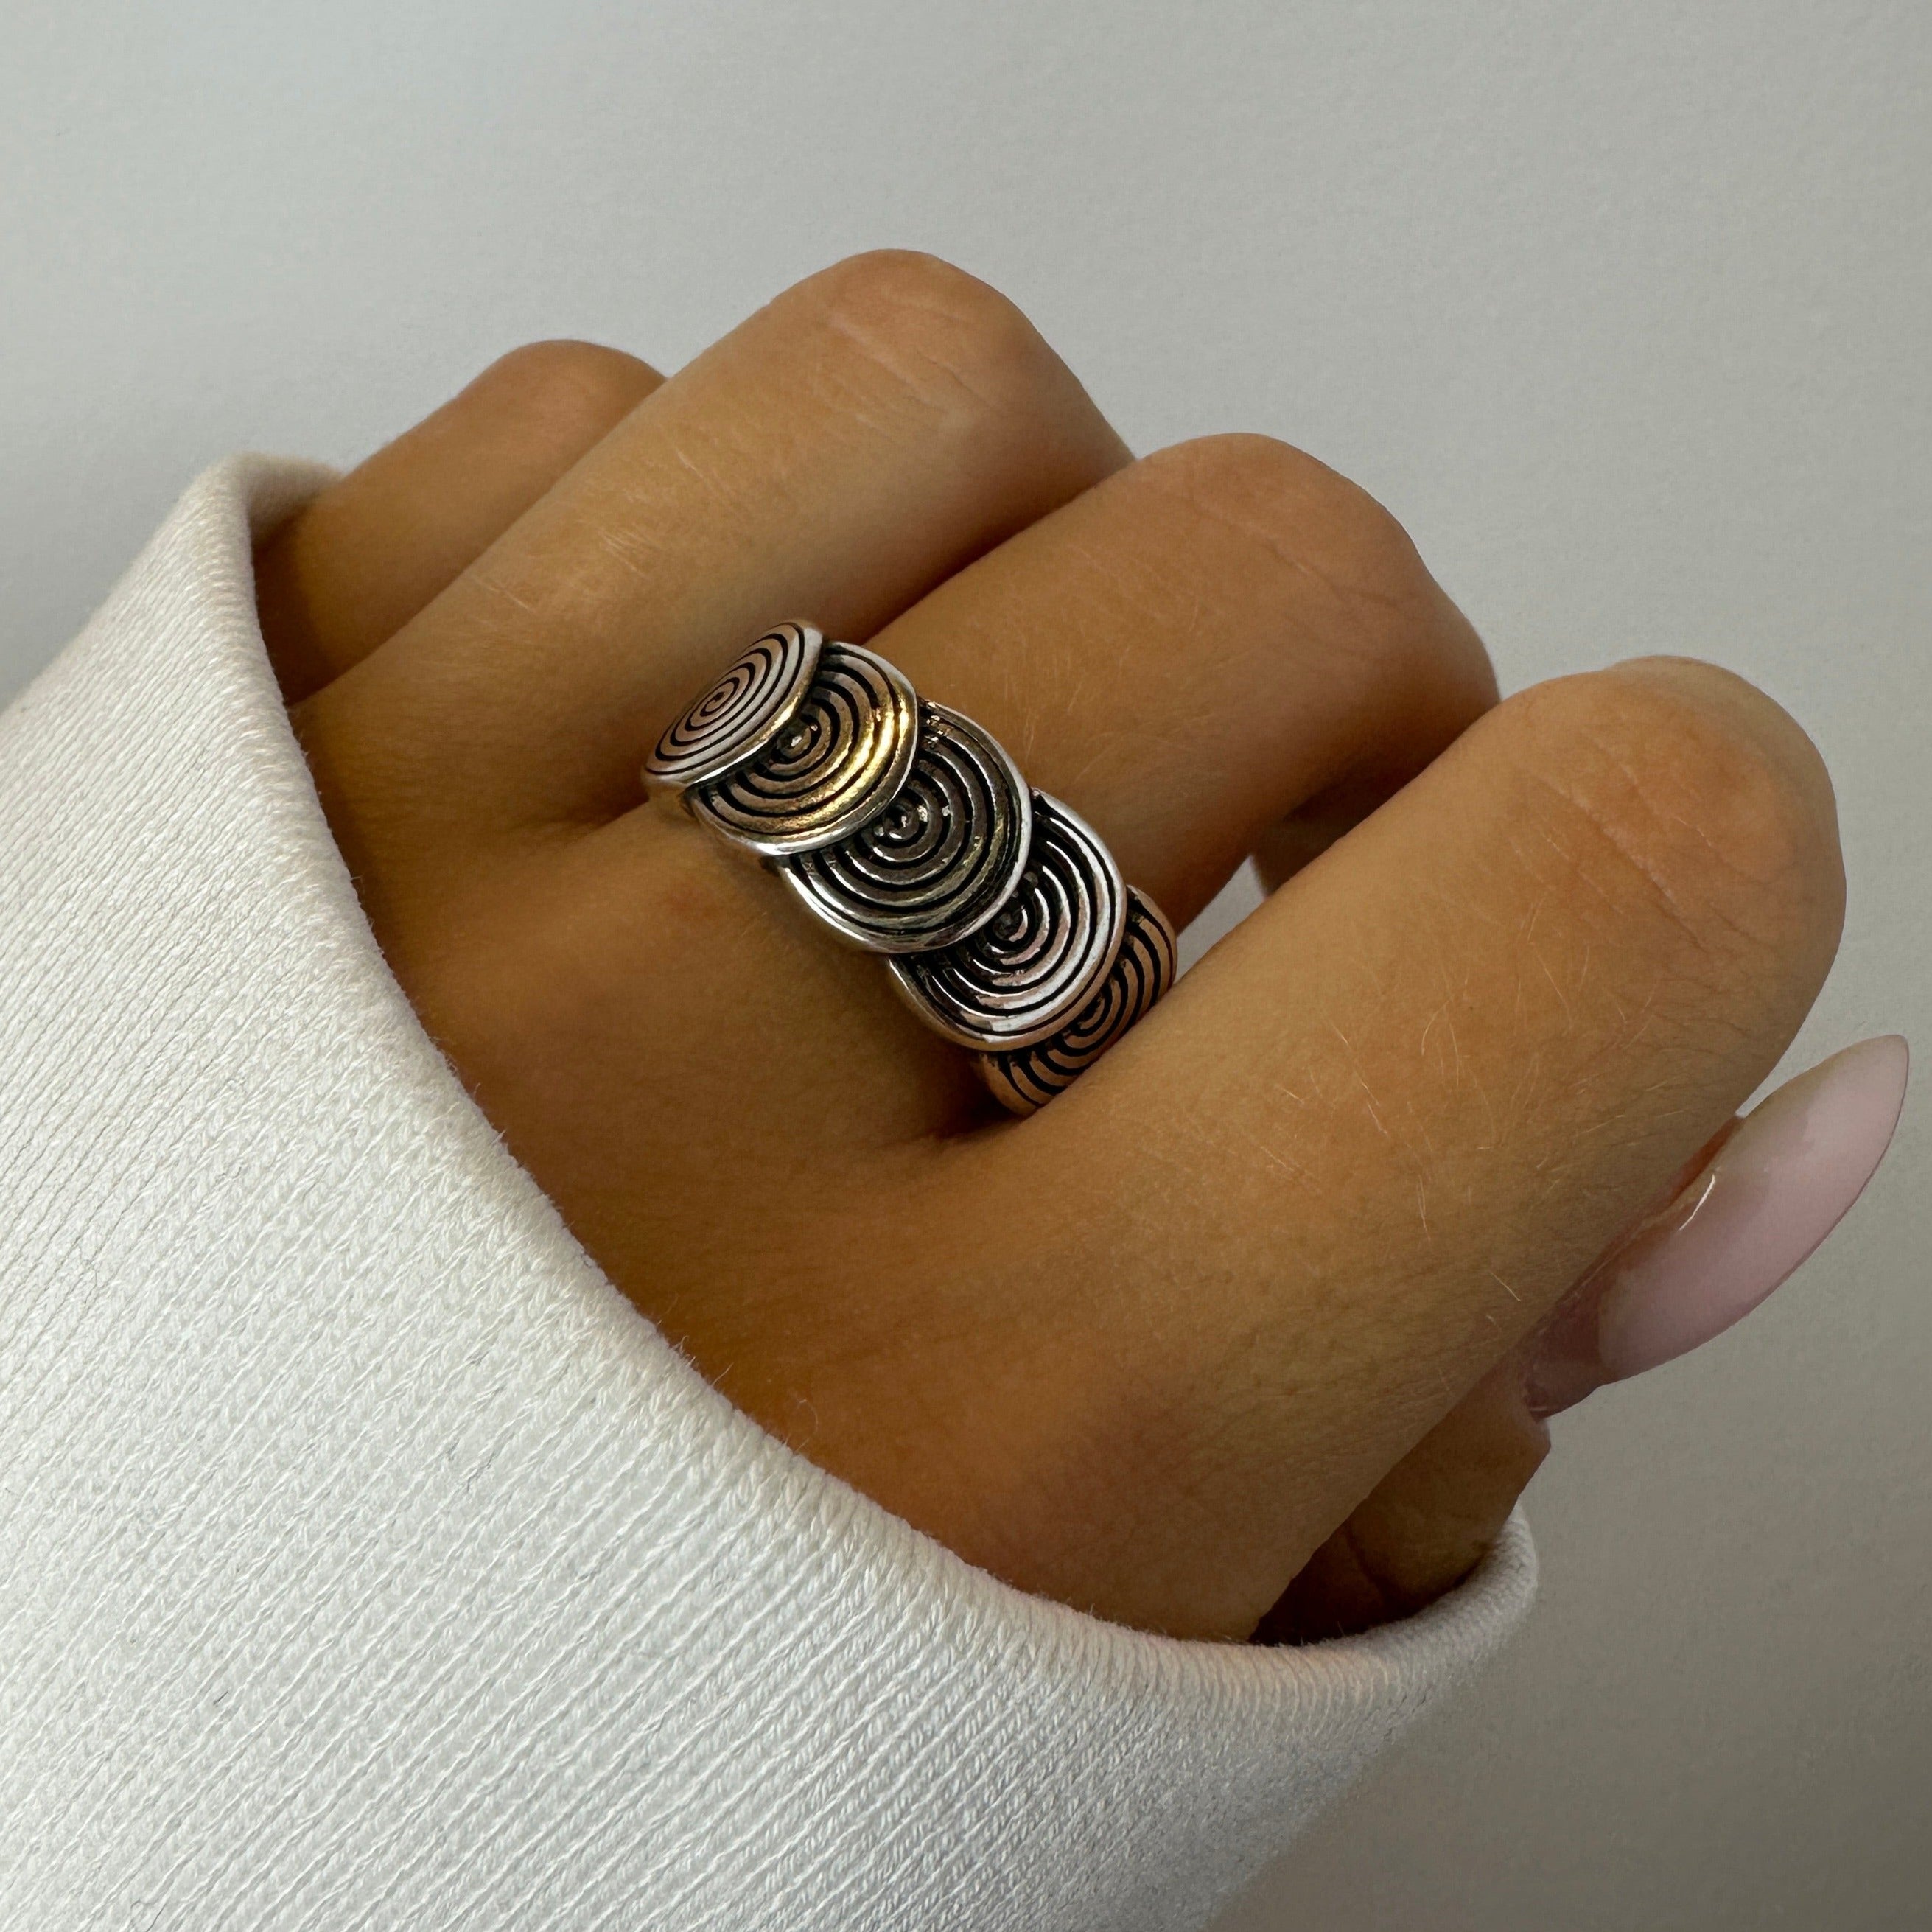 Chunky Sterling Silver Ring, Wide Ring, Mens Silver Ring, Stripes Ring,  Squares Ring, Womens Ring, Massive Ring, Large Ring, Masculine Ring - Etsy  | Mens silver rings, Silver ring designs, Silver rings handmade